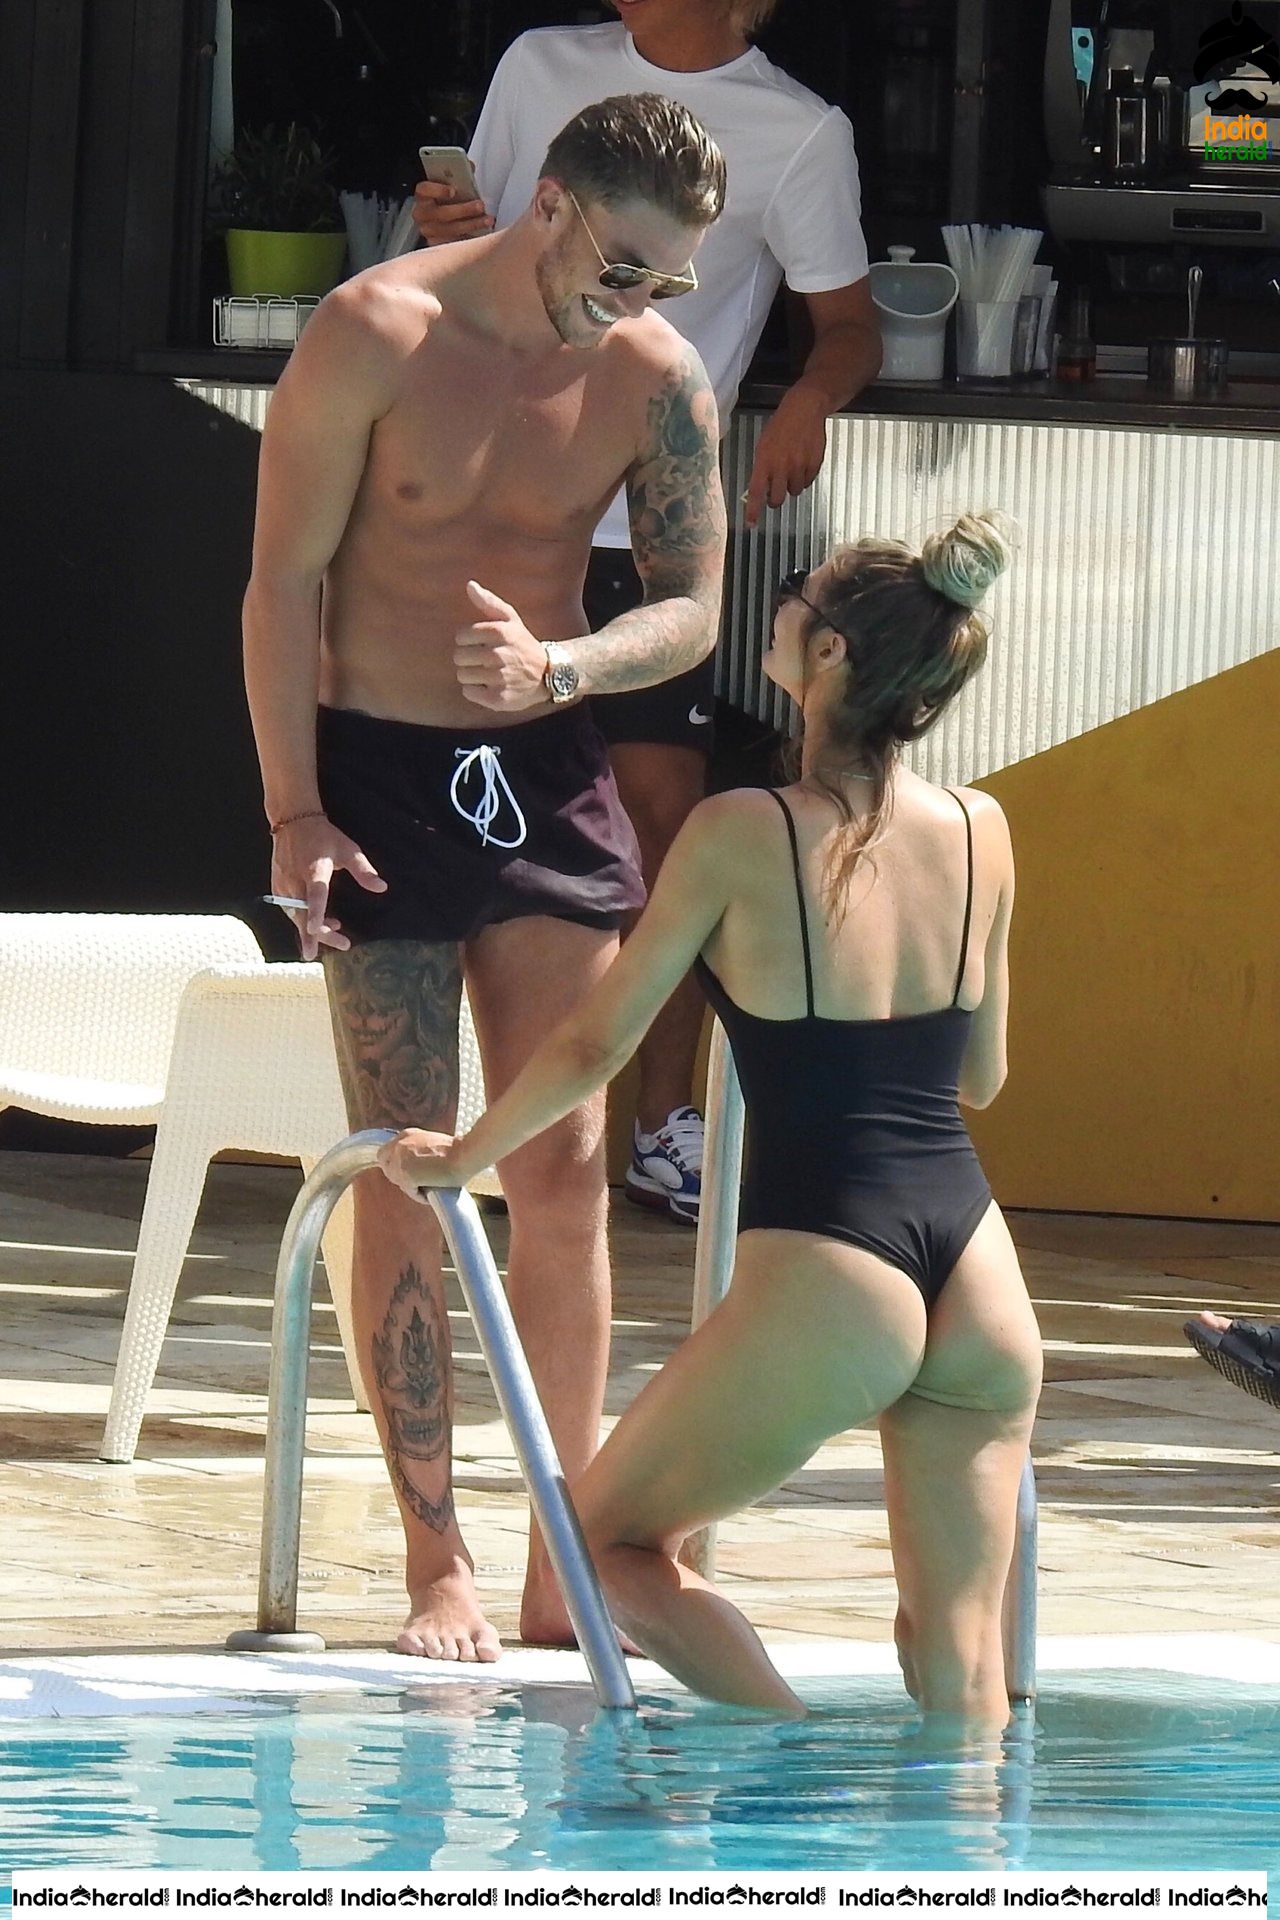 Chloe Spotted in Bikini with her Boyfriend at a Hotel in Encino